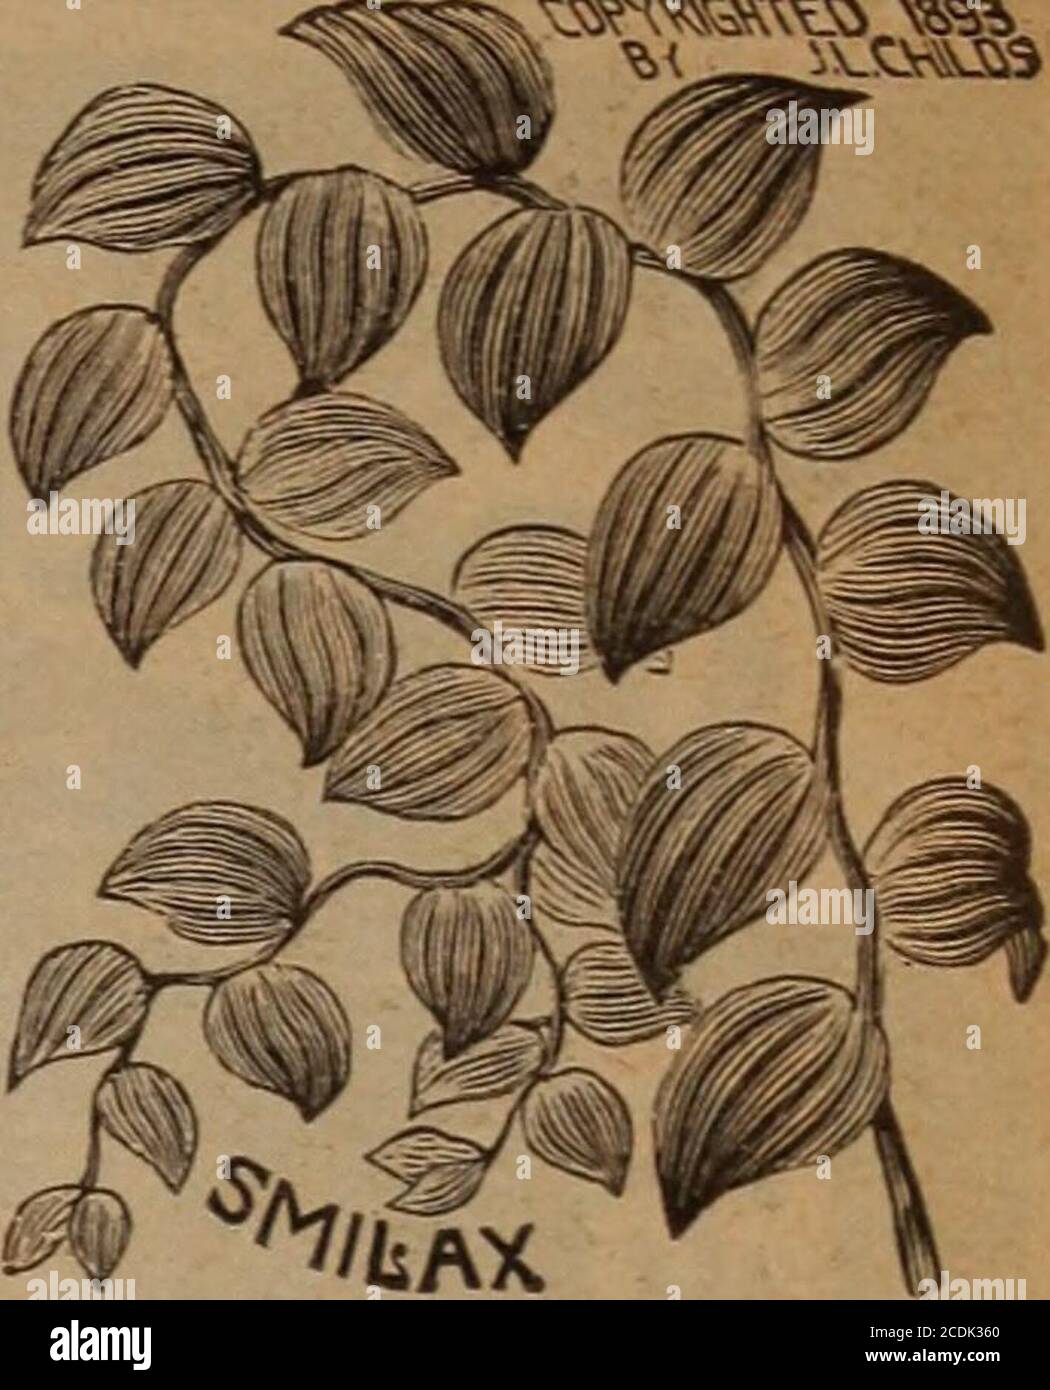 . Childs' spring 1922 : seeds that satisfy plants that please bulbs that bloom berries that bear . scented. 30c each; 4 for $1.00 Smilax — This well-known and popular slen-der twining vine scarce-ly needs description here.Its delicate sprays orglossy green are seen infloral decorations ofmany kinds. It growswell in the house andquickly covers any sup-port given it with daintytendrils of green. It hasvery small white flowersamong its leaves andalso bears small purplishberries. 30c each; 4 for $1.00 HERBA BUENA (Micromeria Chamissonis) A delightful trailing plant from Mexico. Grows rap-idly like Stock Photo